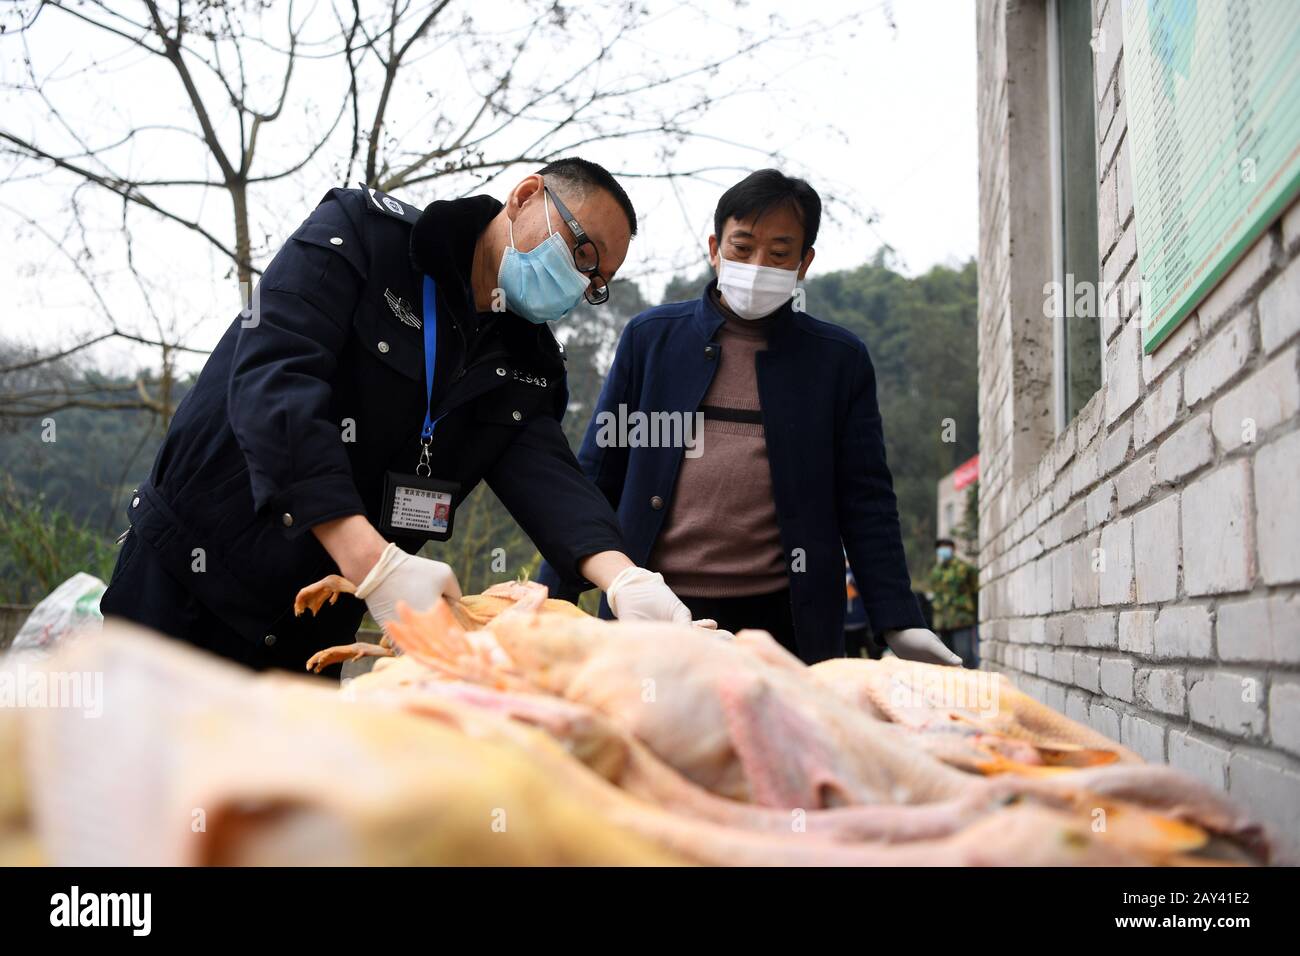 Chongqing. 14th Feb, 2020. A staff of local veterinary station checks a butchered duck at Shuangjing village of Yufengshan Town in Yubei District of southwest China's Chongqing Municipality, Feb. 14, 2020. Since the outbreak of the novel coronavirus, Fu Zongyong, a poverty-striken farmer has been unable to sell his ducks due to the closing of live poultry markets. Local authorities sent staff to help him with quarantine and sales of ducks to ensure his income during the battle against the epidemic. Credit: Tang Yi/Xinhua/Alamy Live News Stock Photo